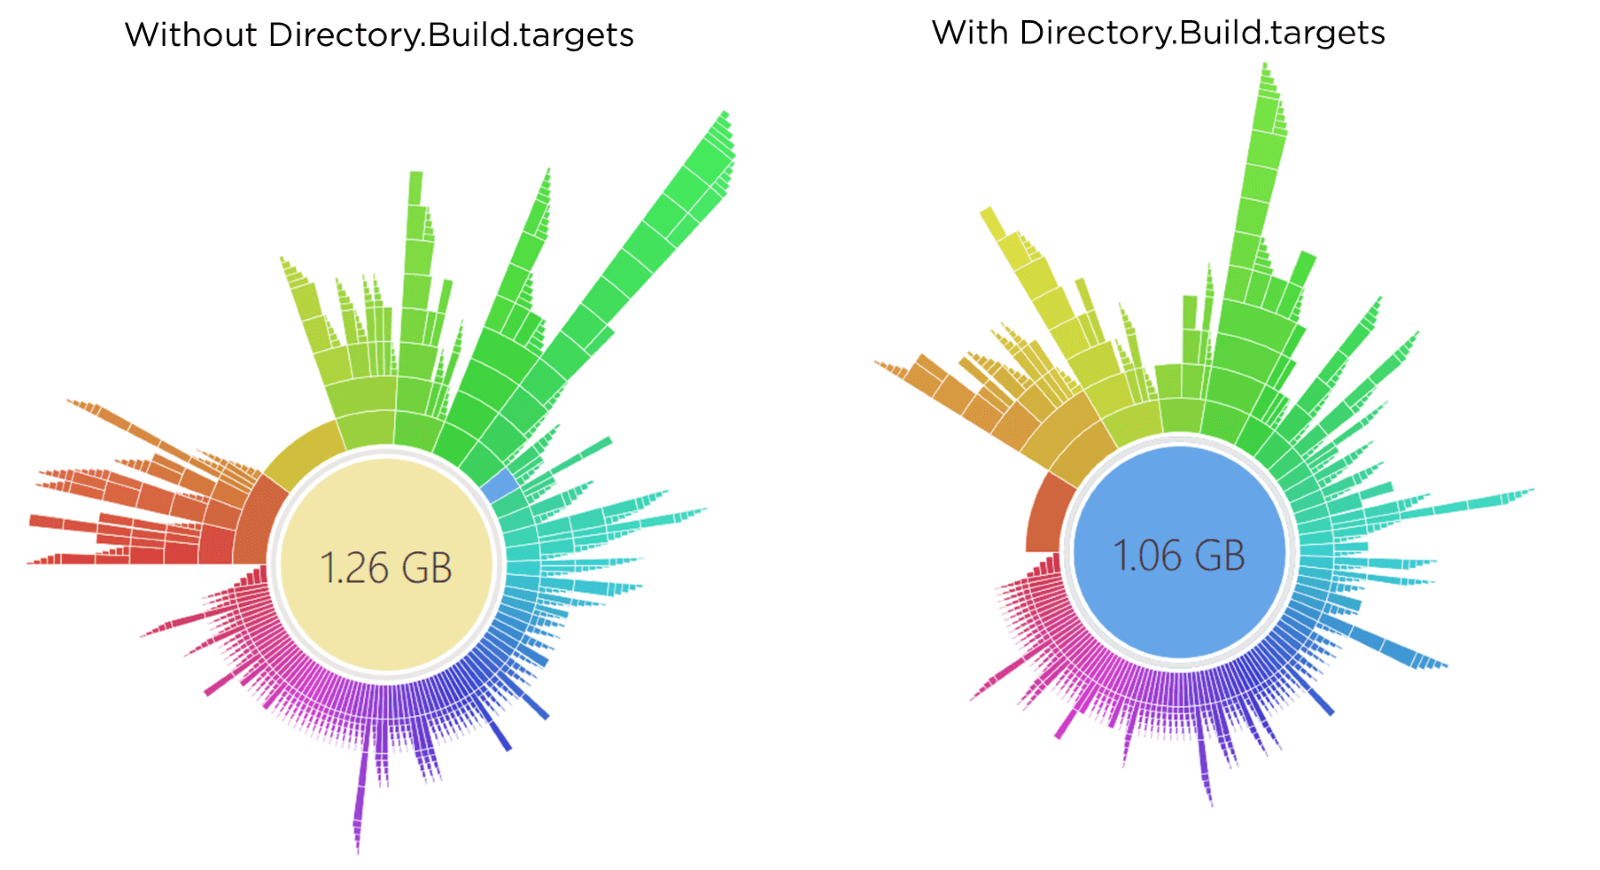 Memory usage - comparing before and after